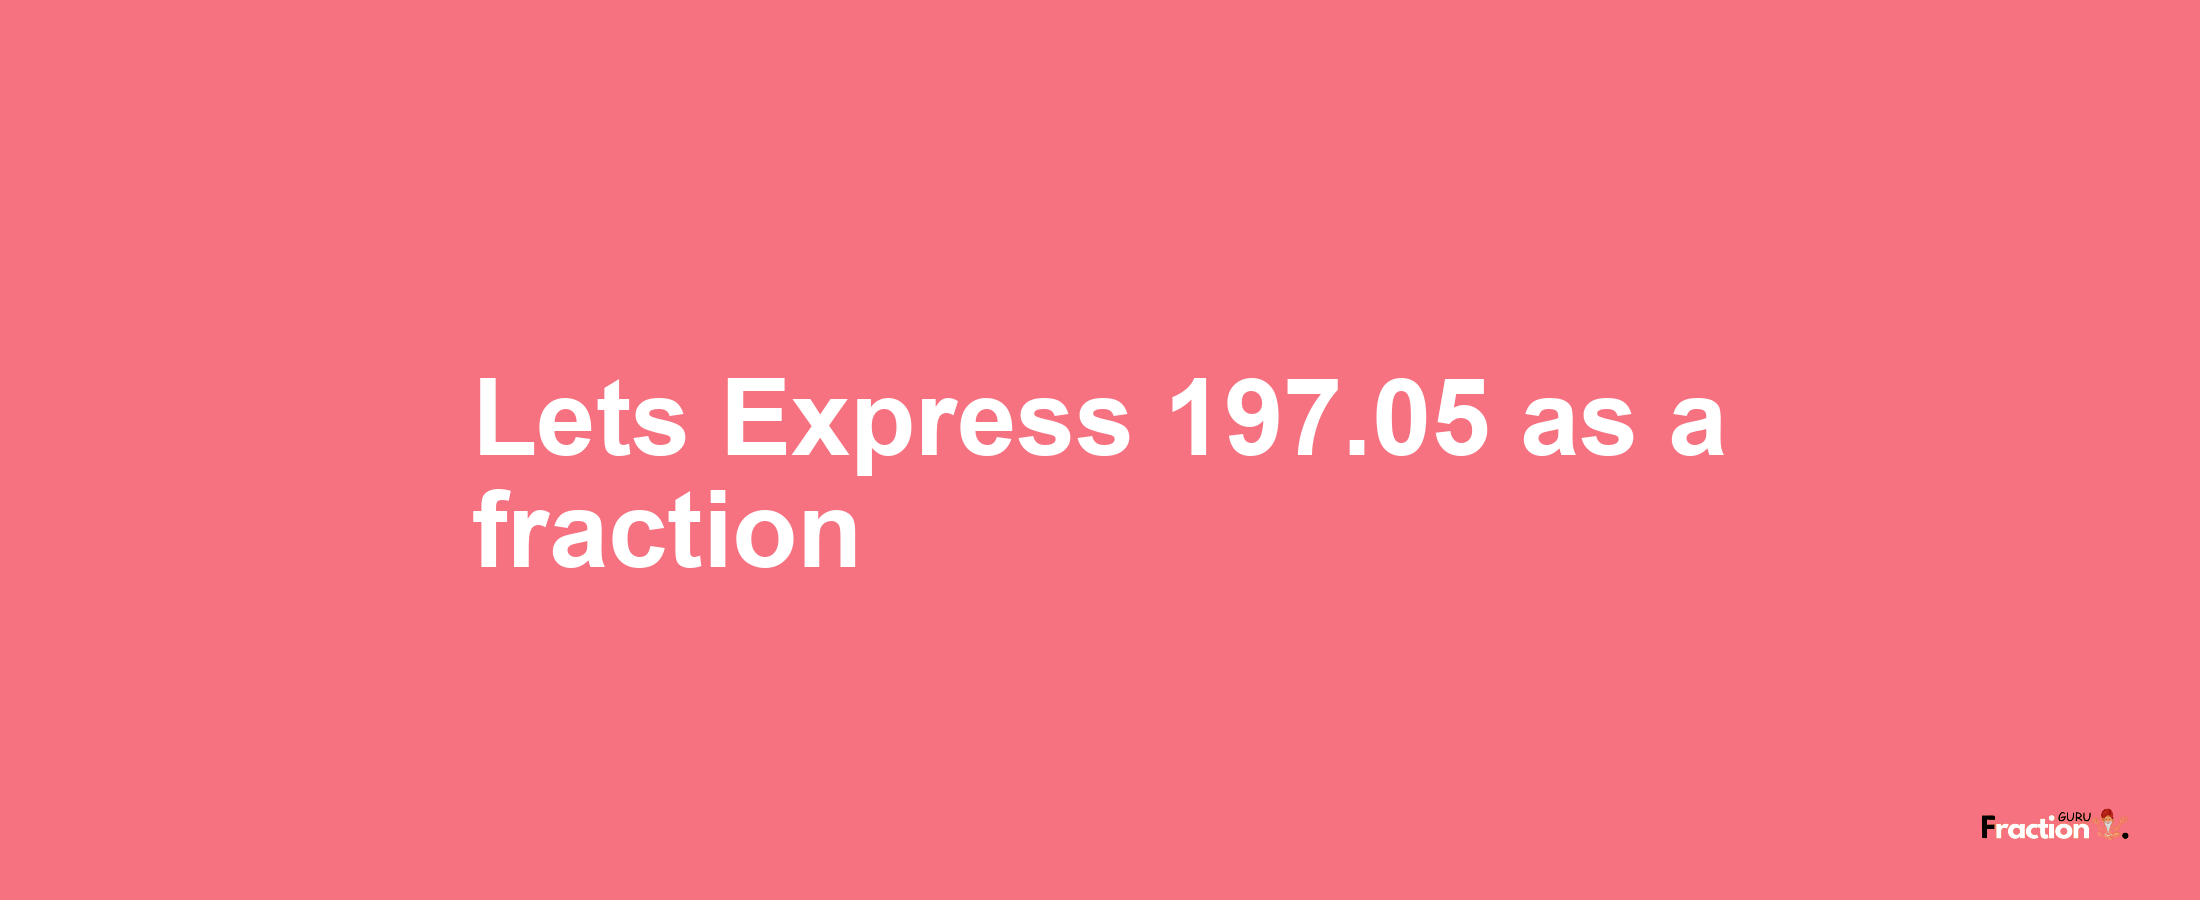 Lets Express 197.05 as afraction